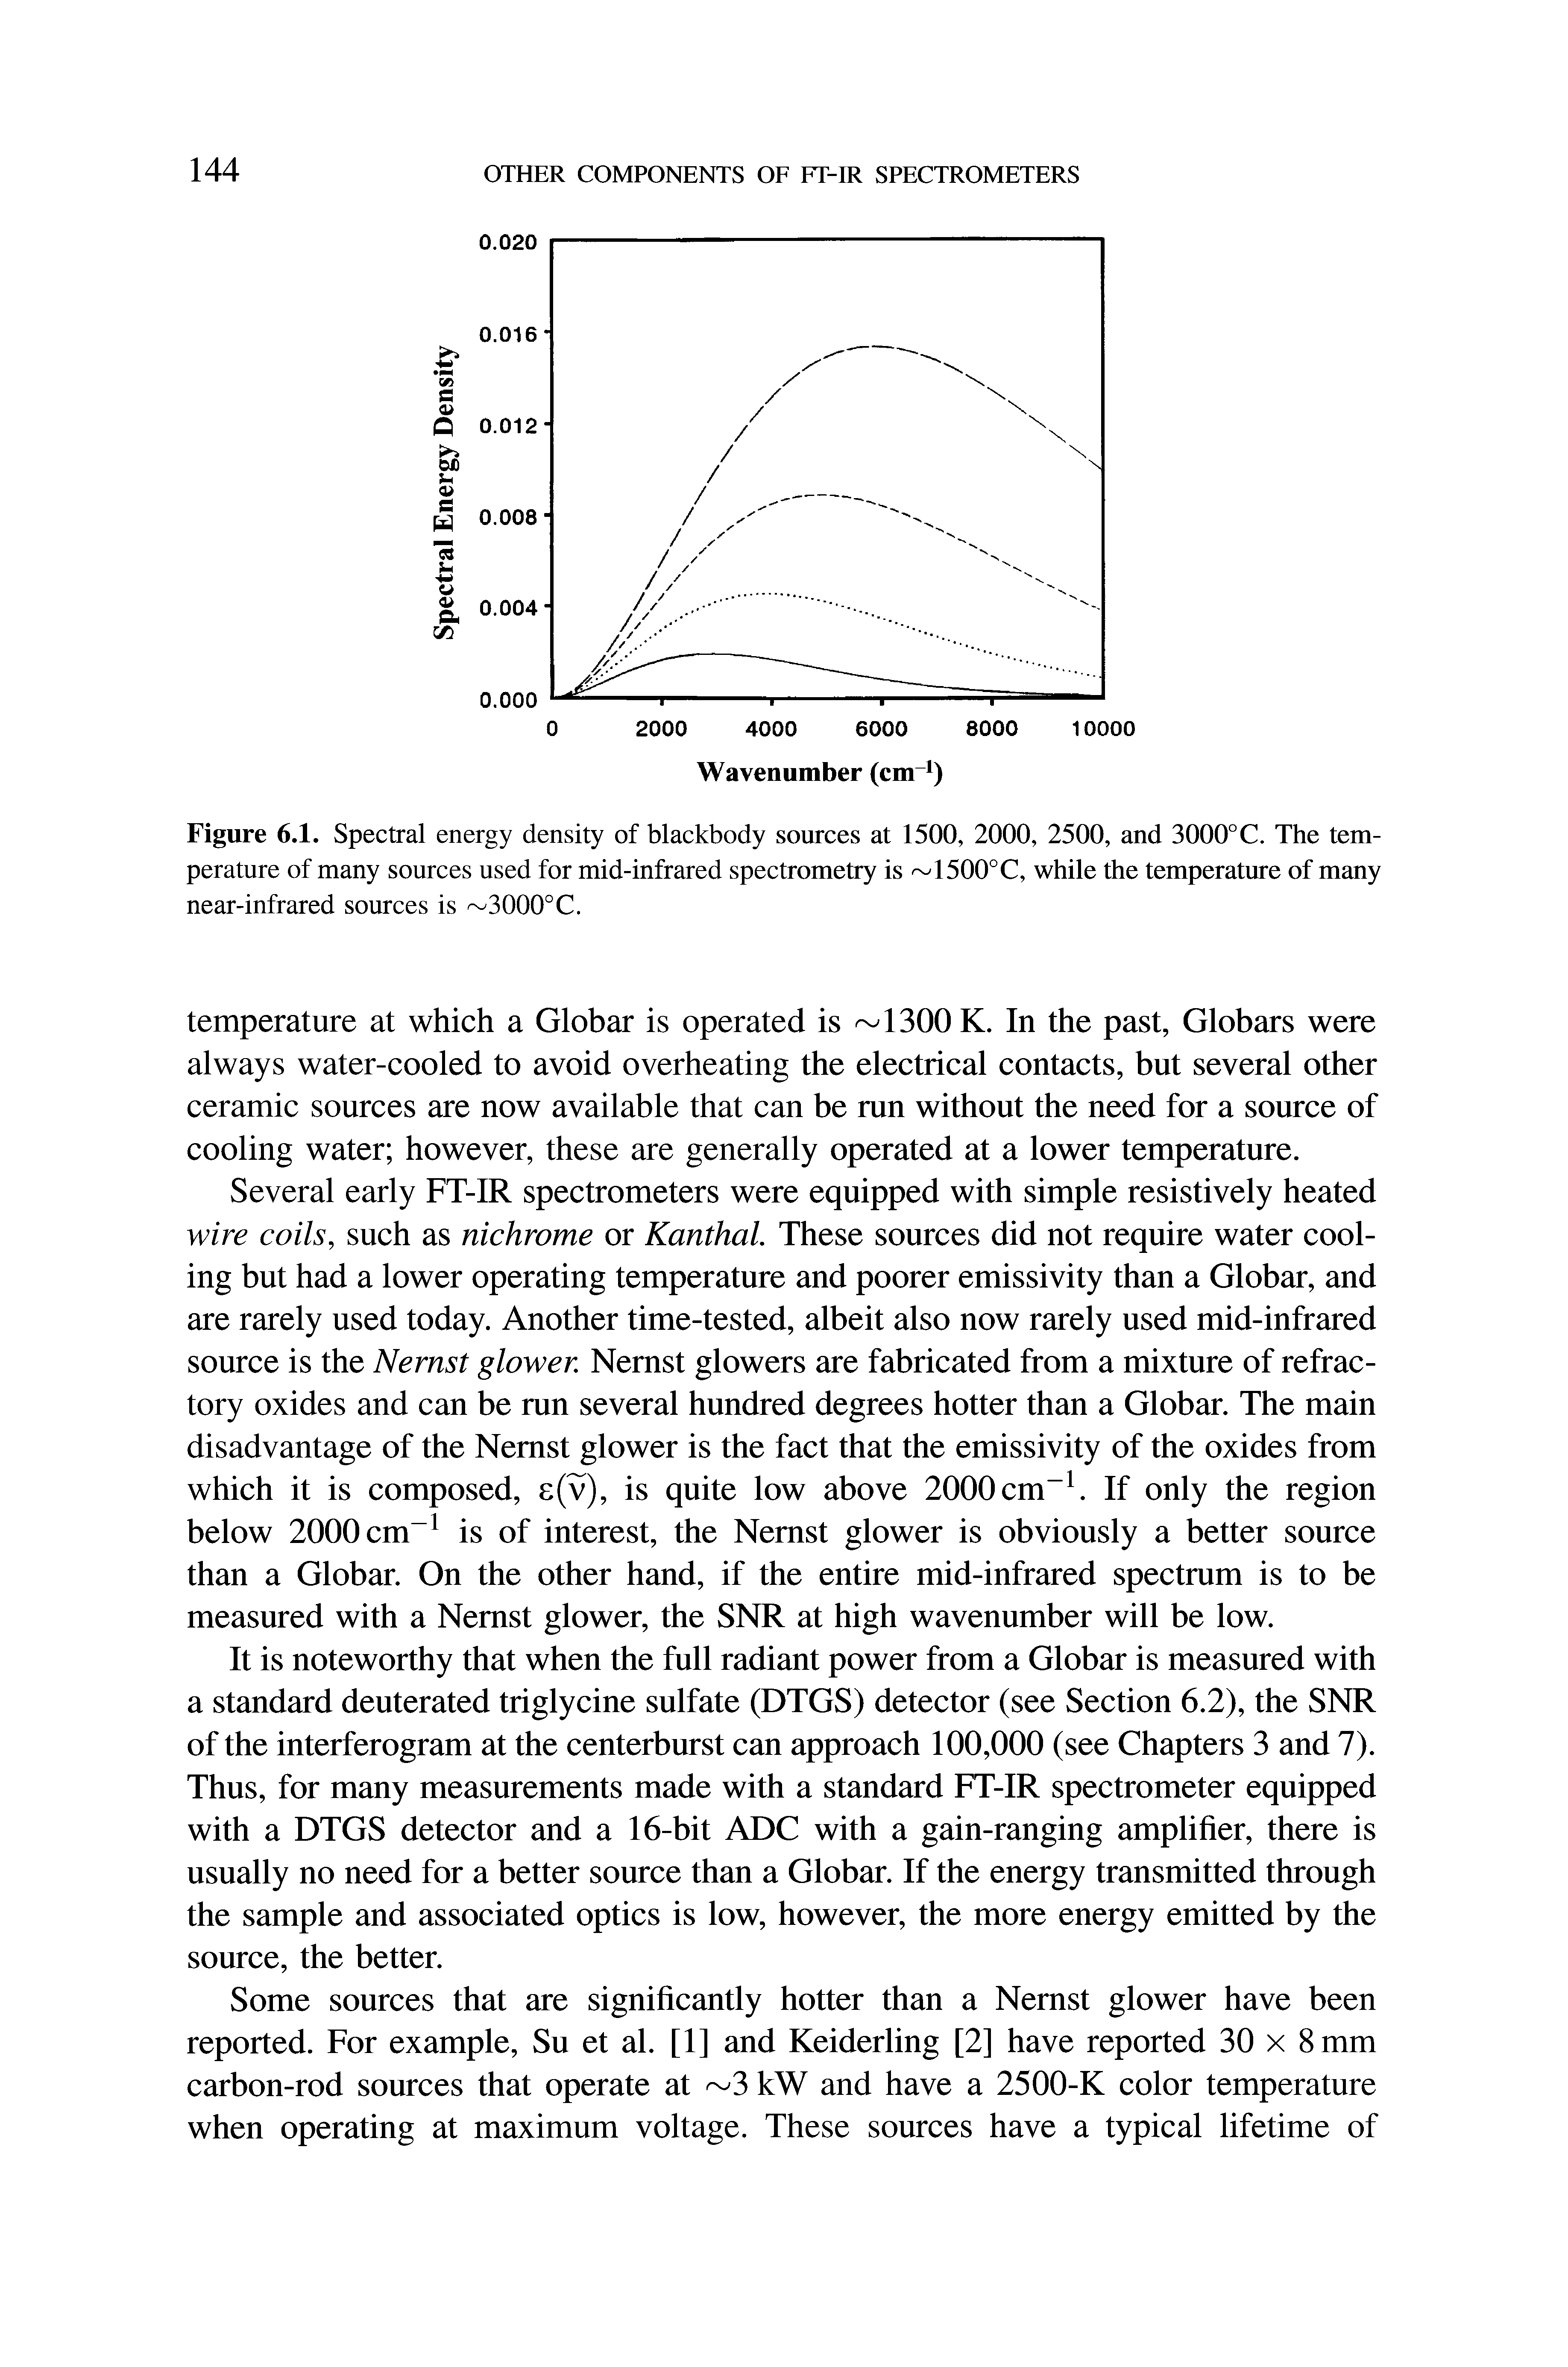 Figure 6.1. Spectral energy density of blackbody sources at 1500, 2000, 2500, and 3000°C. The temperature of many sources used for mid-infrared spectrometry is 1500°C, while the temperature of many near-infrared sources is 3000°C.